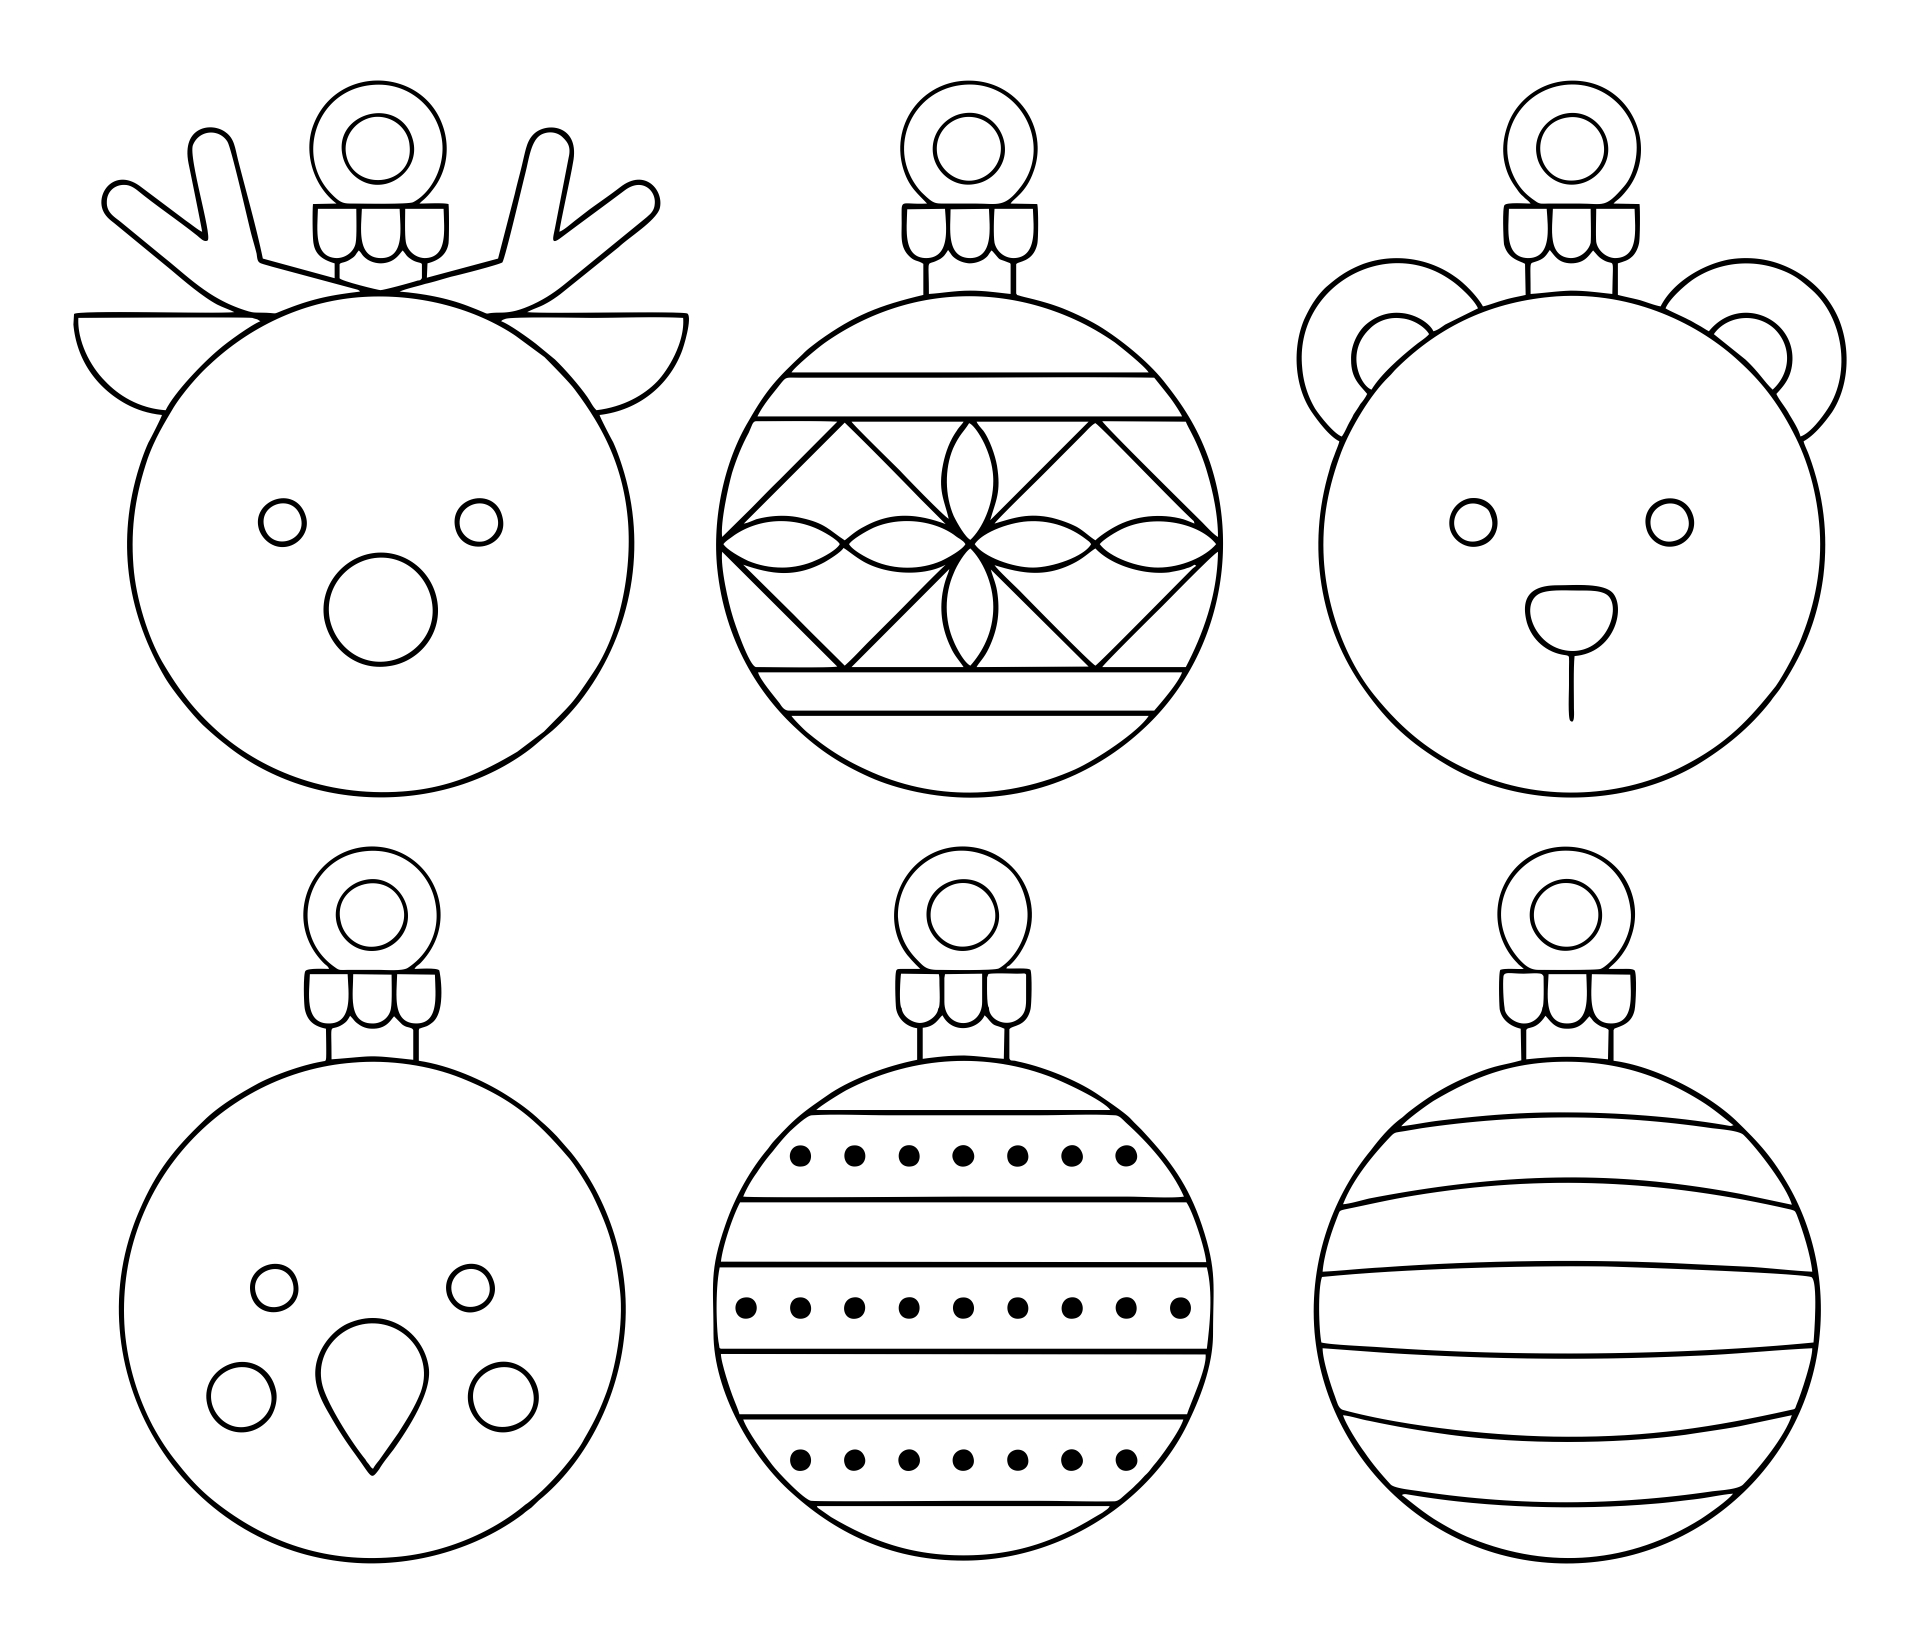 15-best-free-printable-christmas-ornament-templates-pdf-for-free-at-printablee